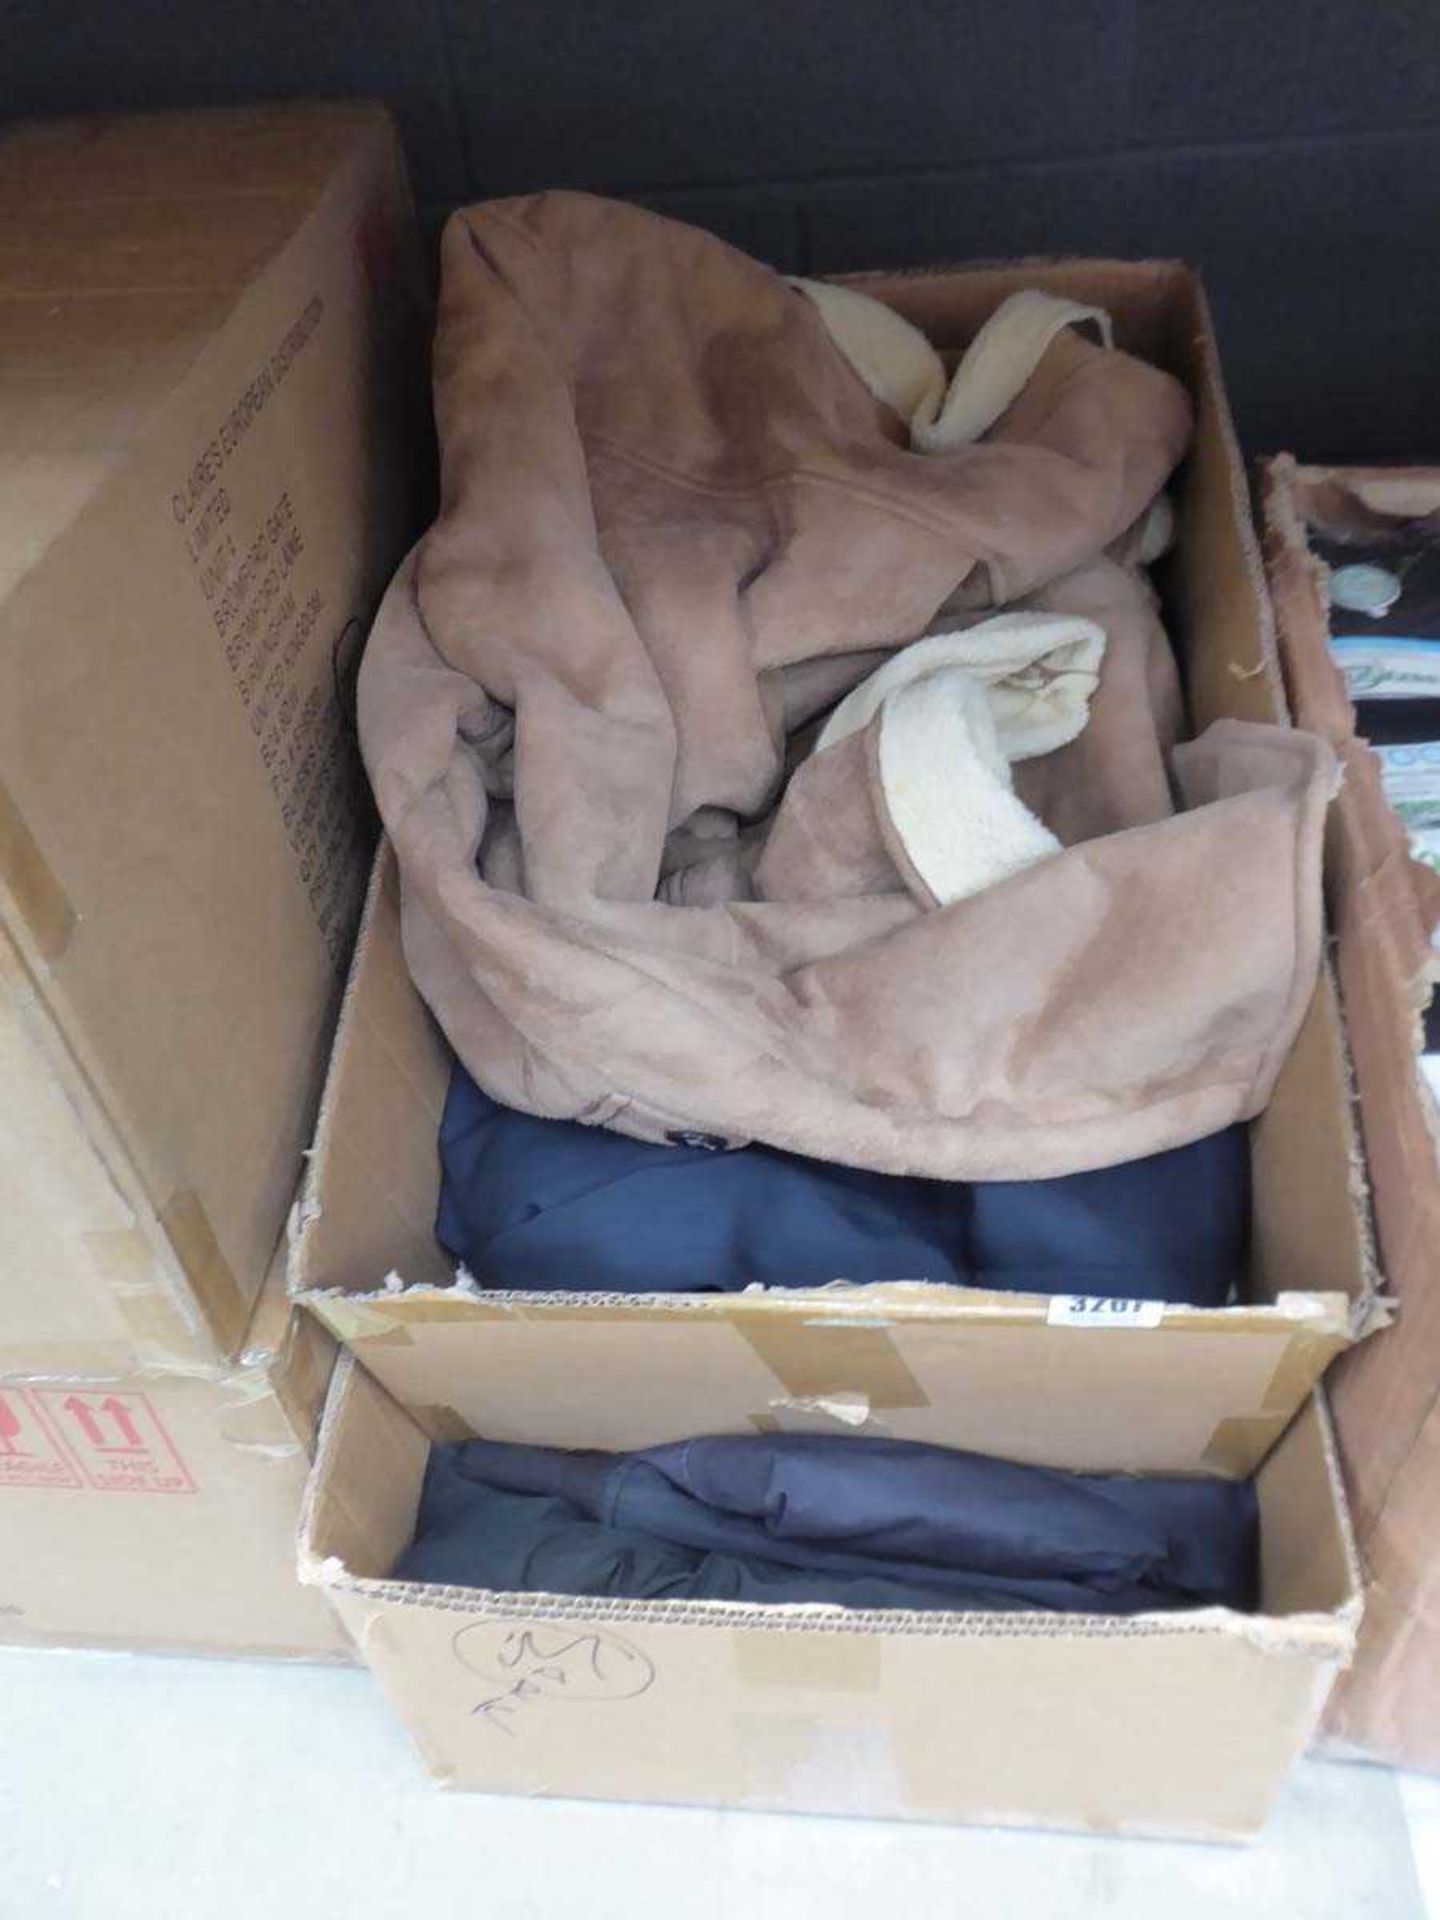 Box containing sheepskin style jacket, M&S blazer jacket and other clothing, with box of Red Herring